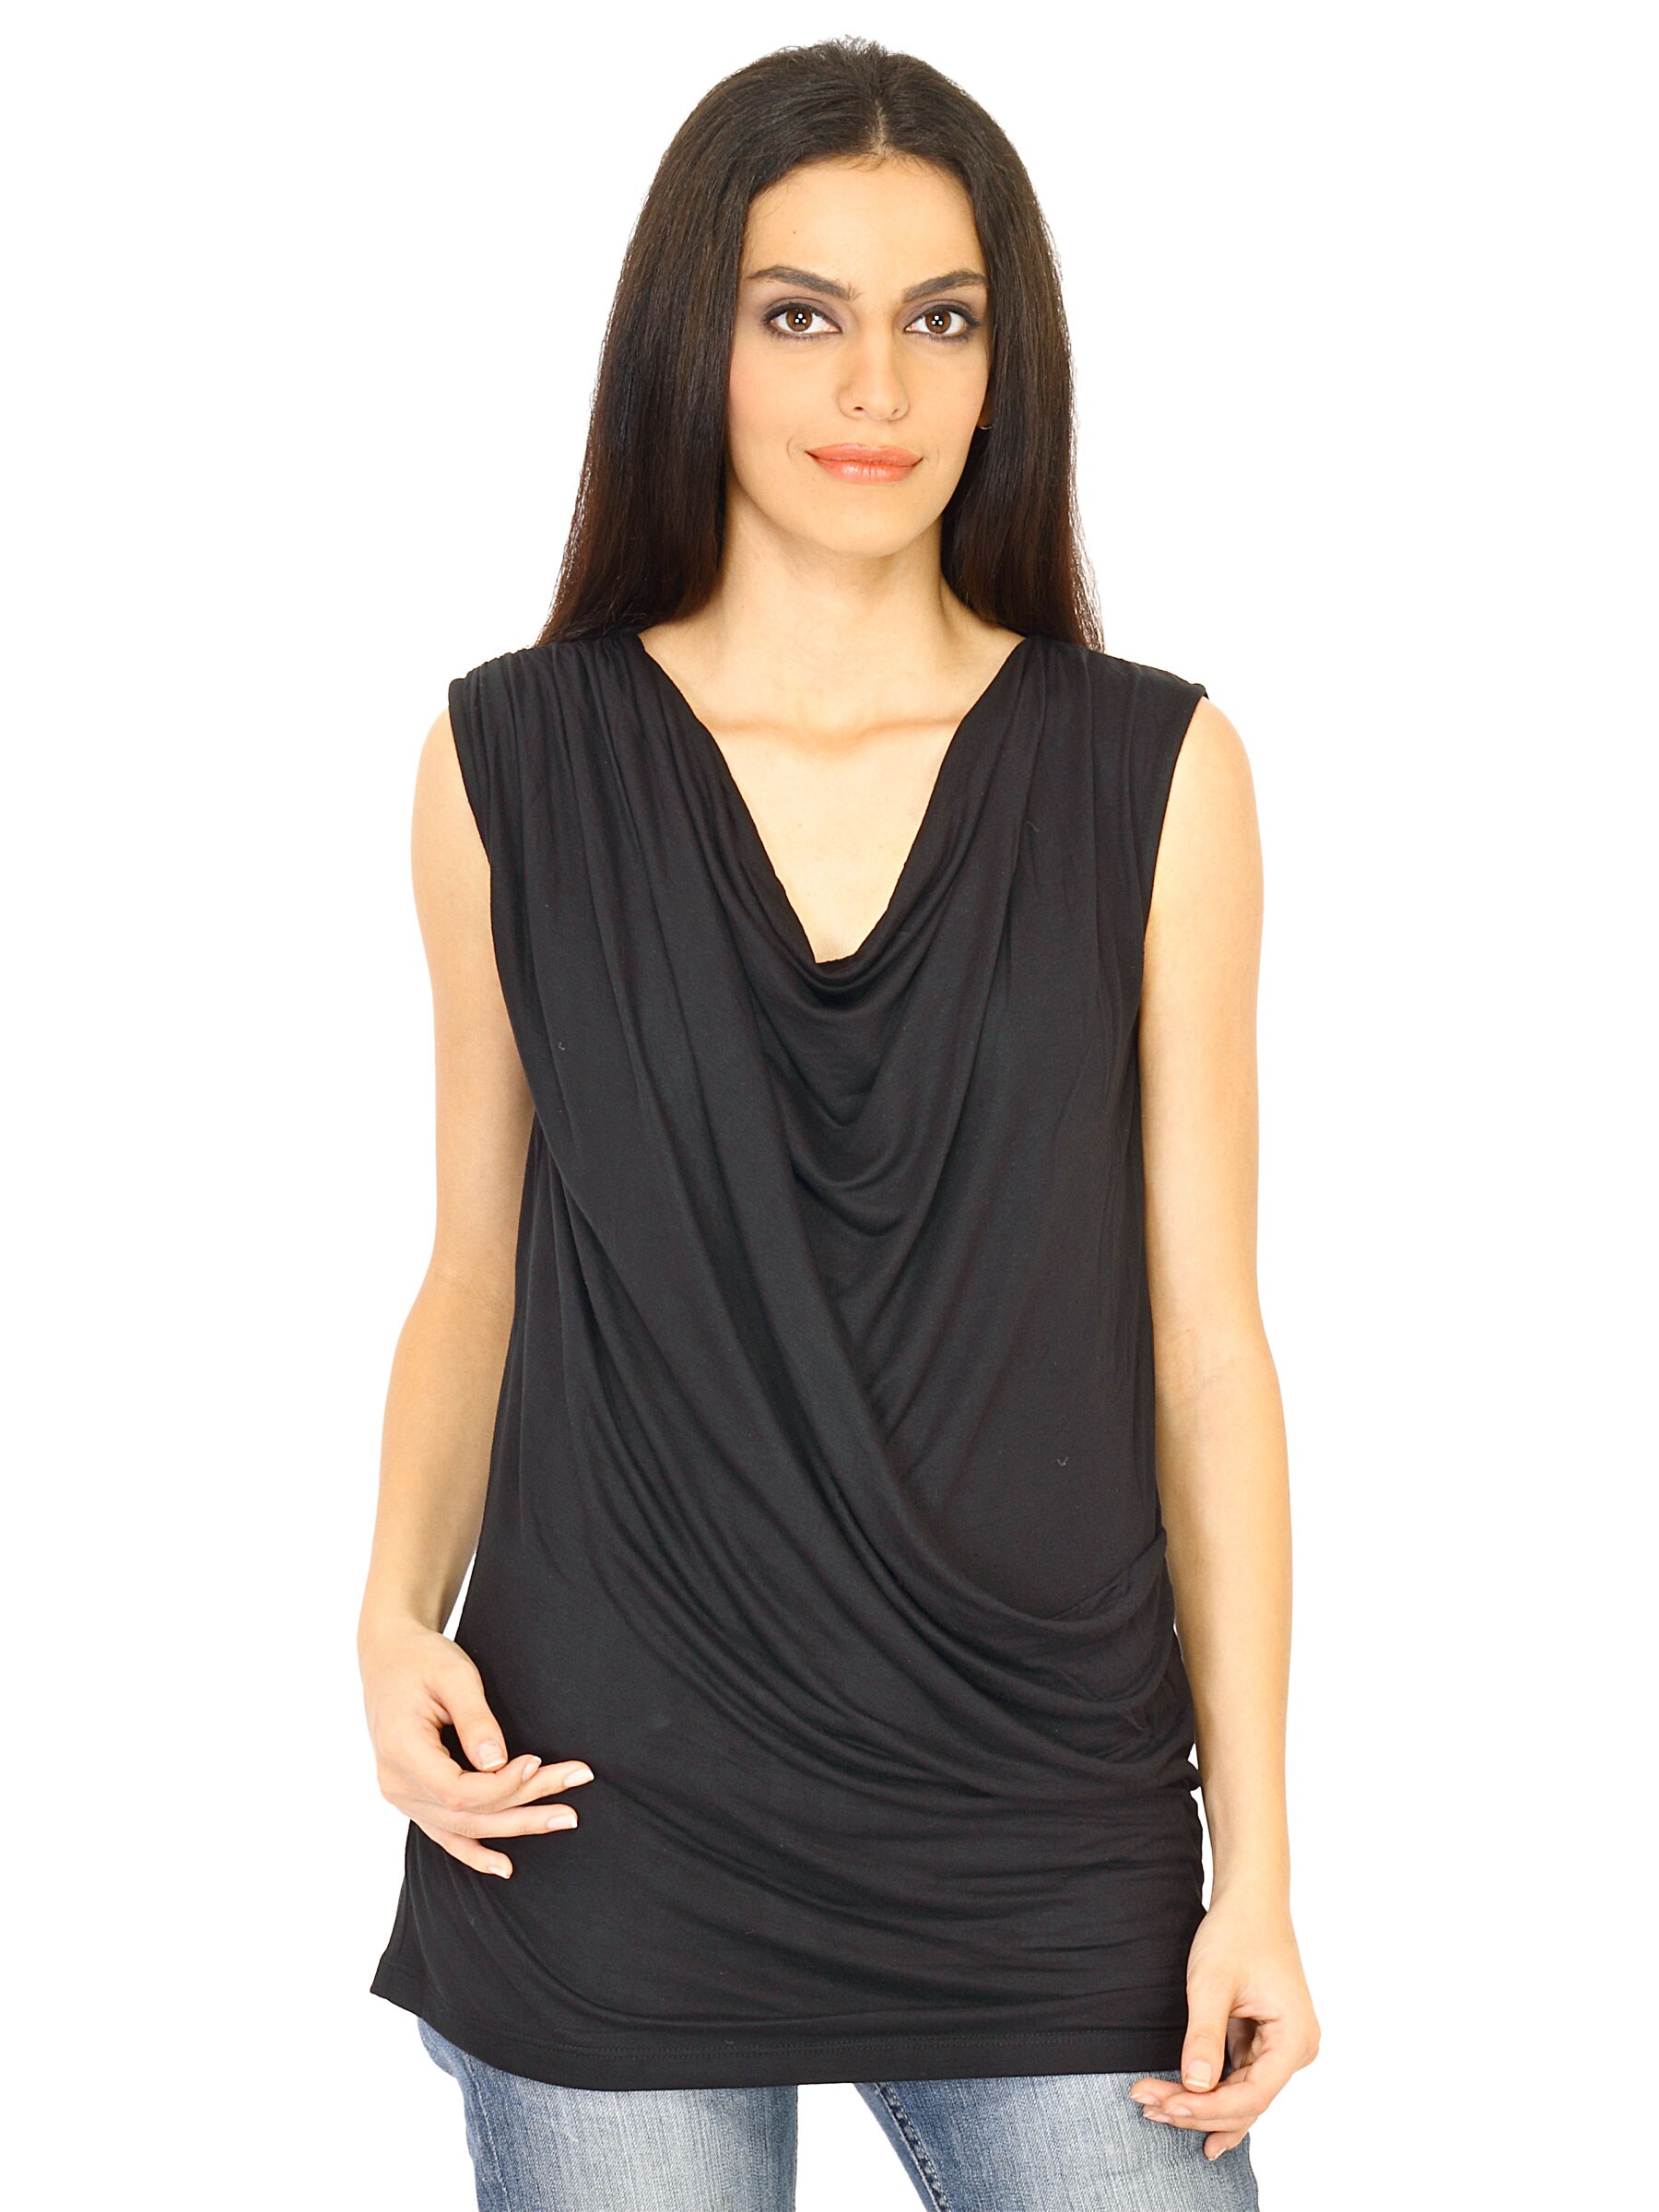 United Colors of Benetton Women Solid Black Tops